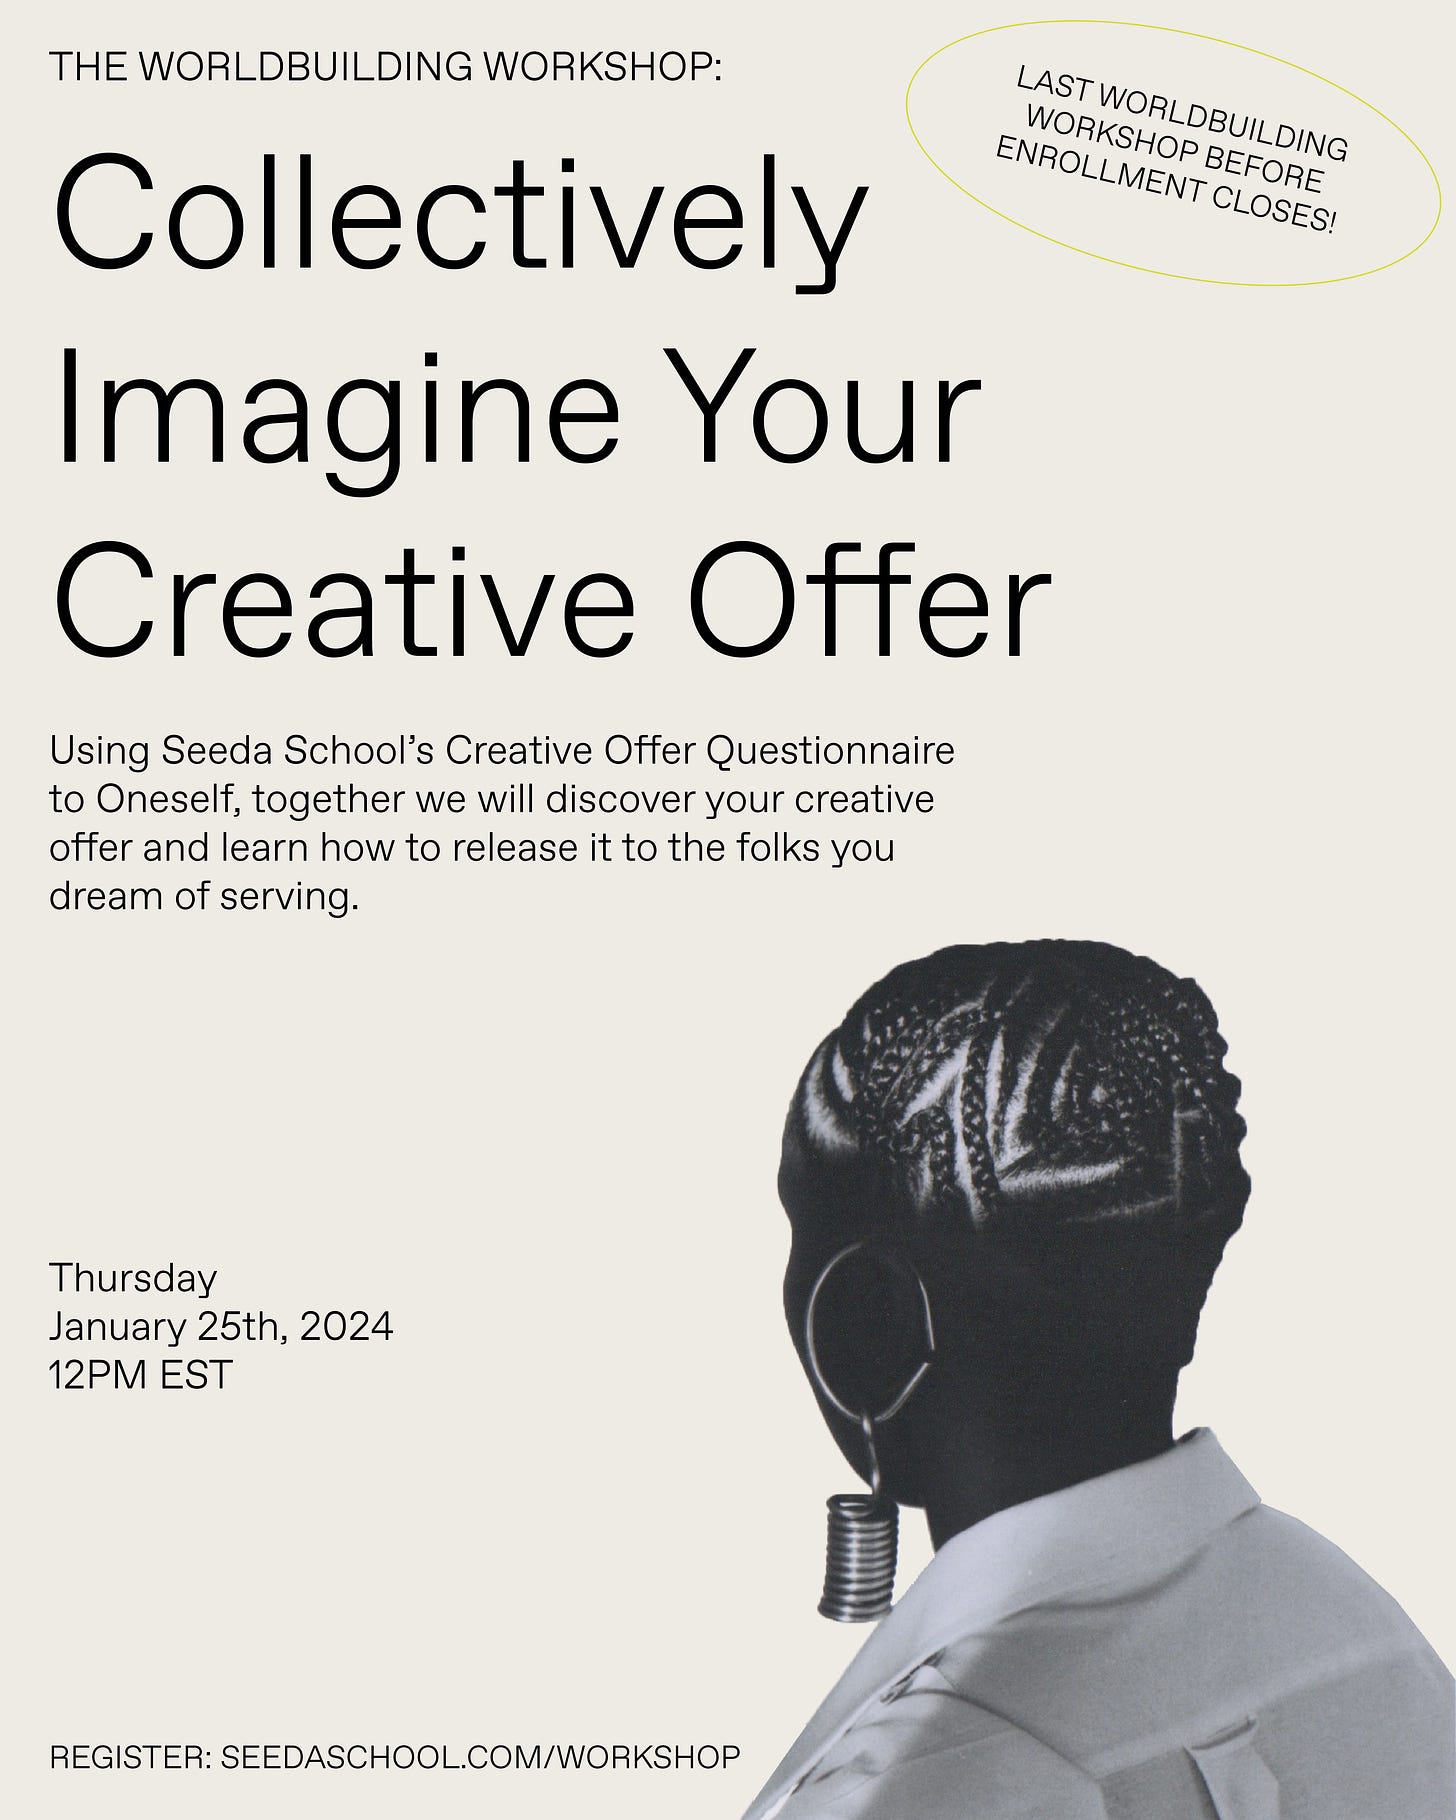 Tan workshop flyer with black text reading "Collectively Imagine Your Creative Offer" with the time and date: 01/25/24 at 12PM EST